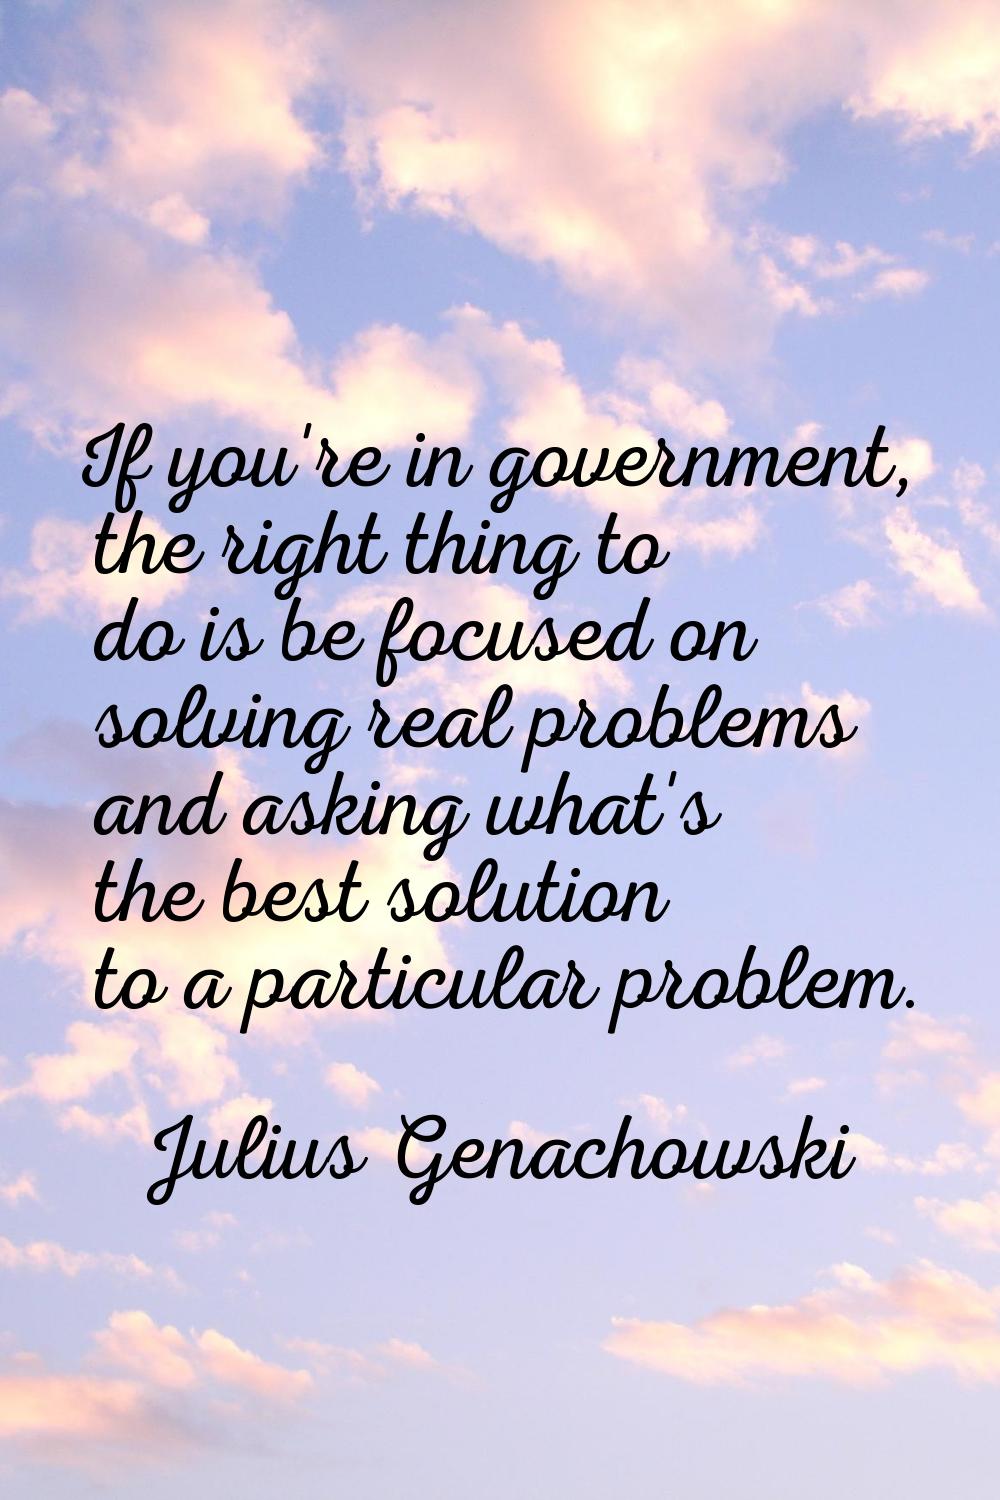 If you're in government, the right thing to do is be focused on solving real problems and asking wh